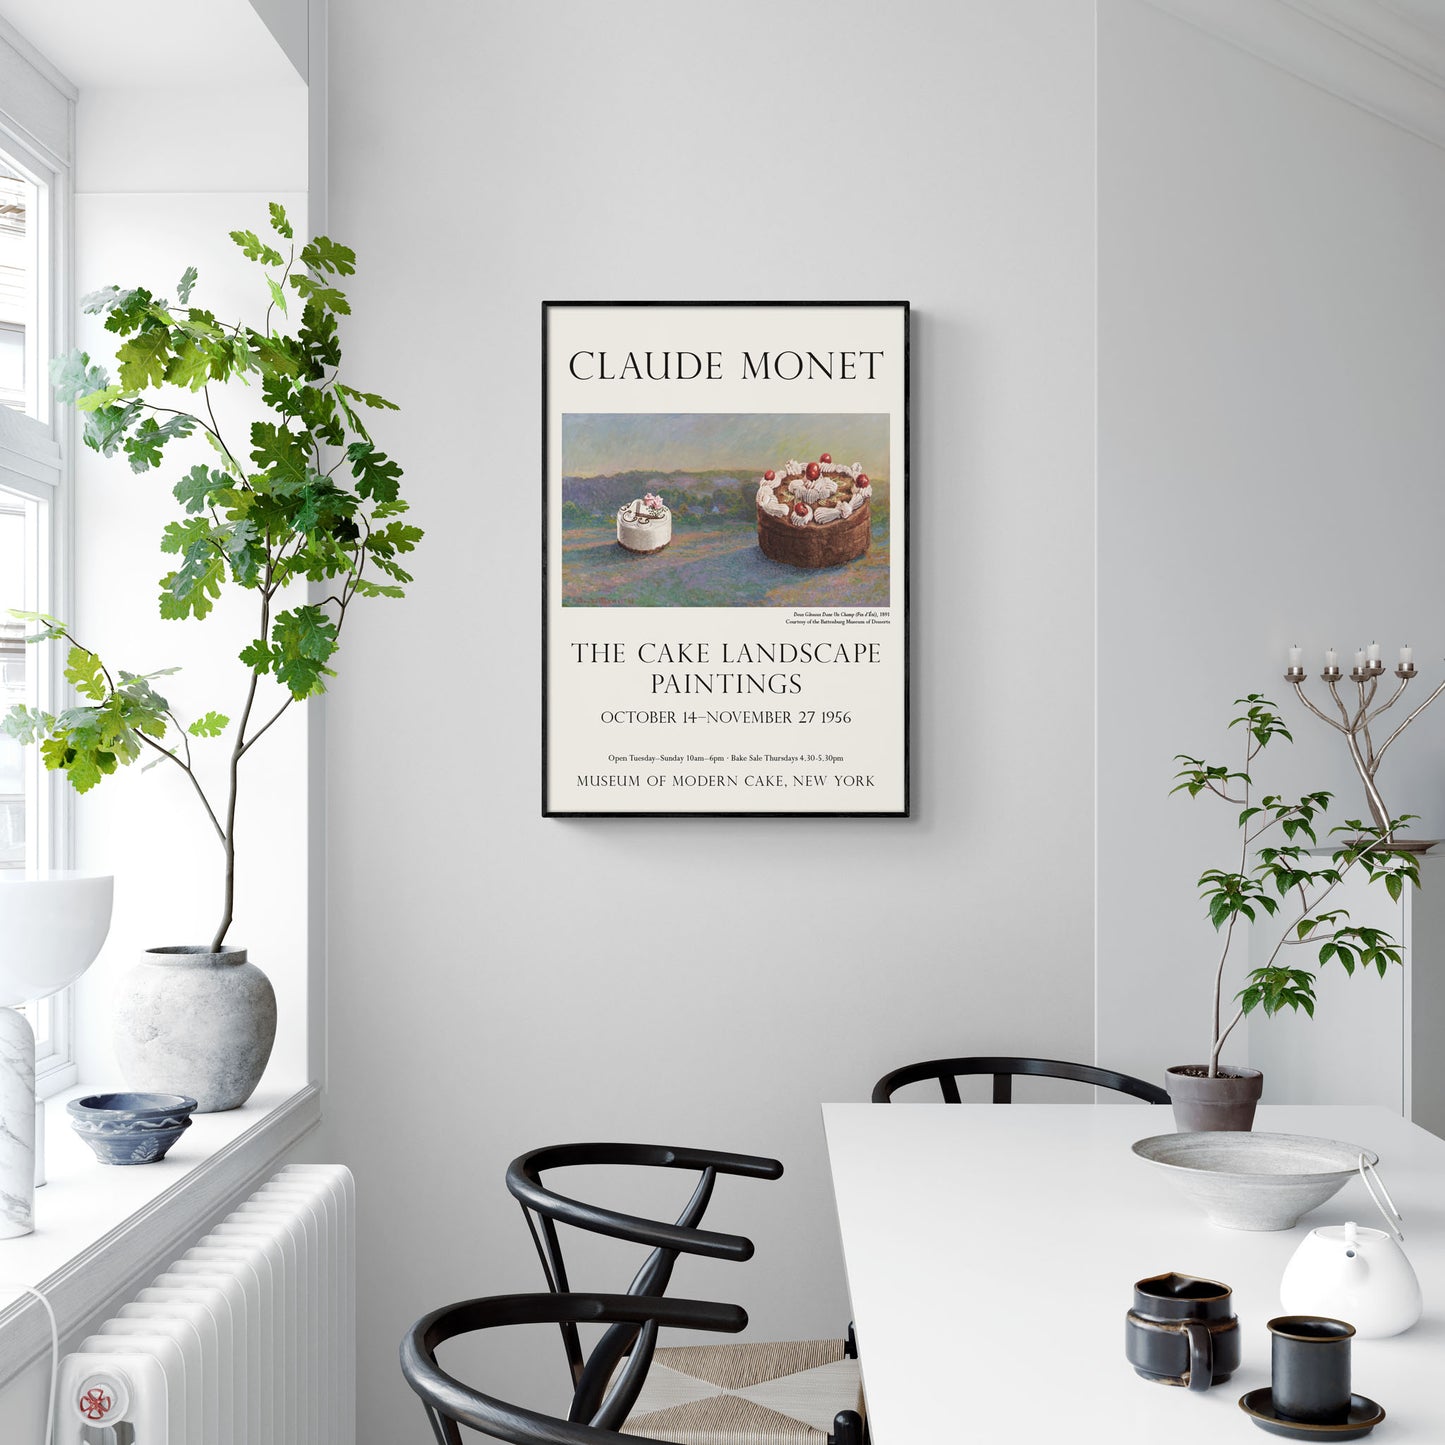 Claude Monet Cakes Painting Exhibition Poster